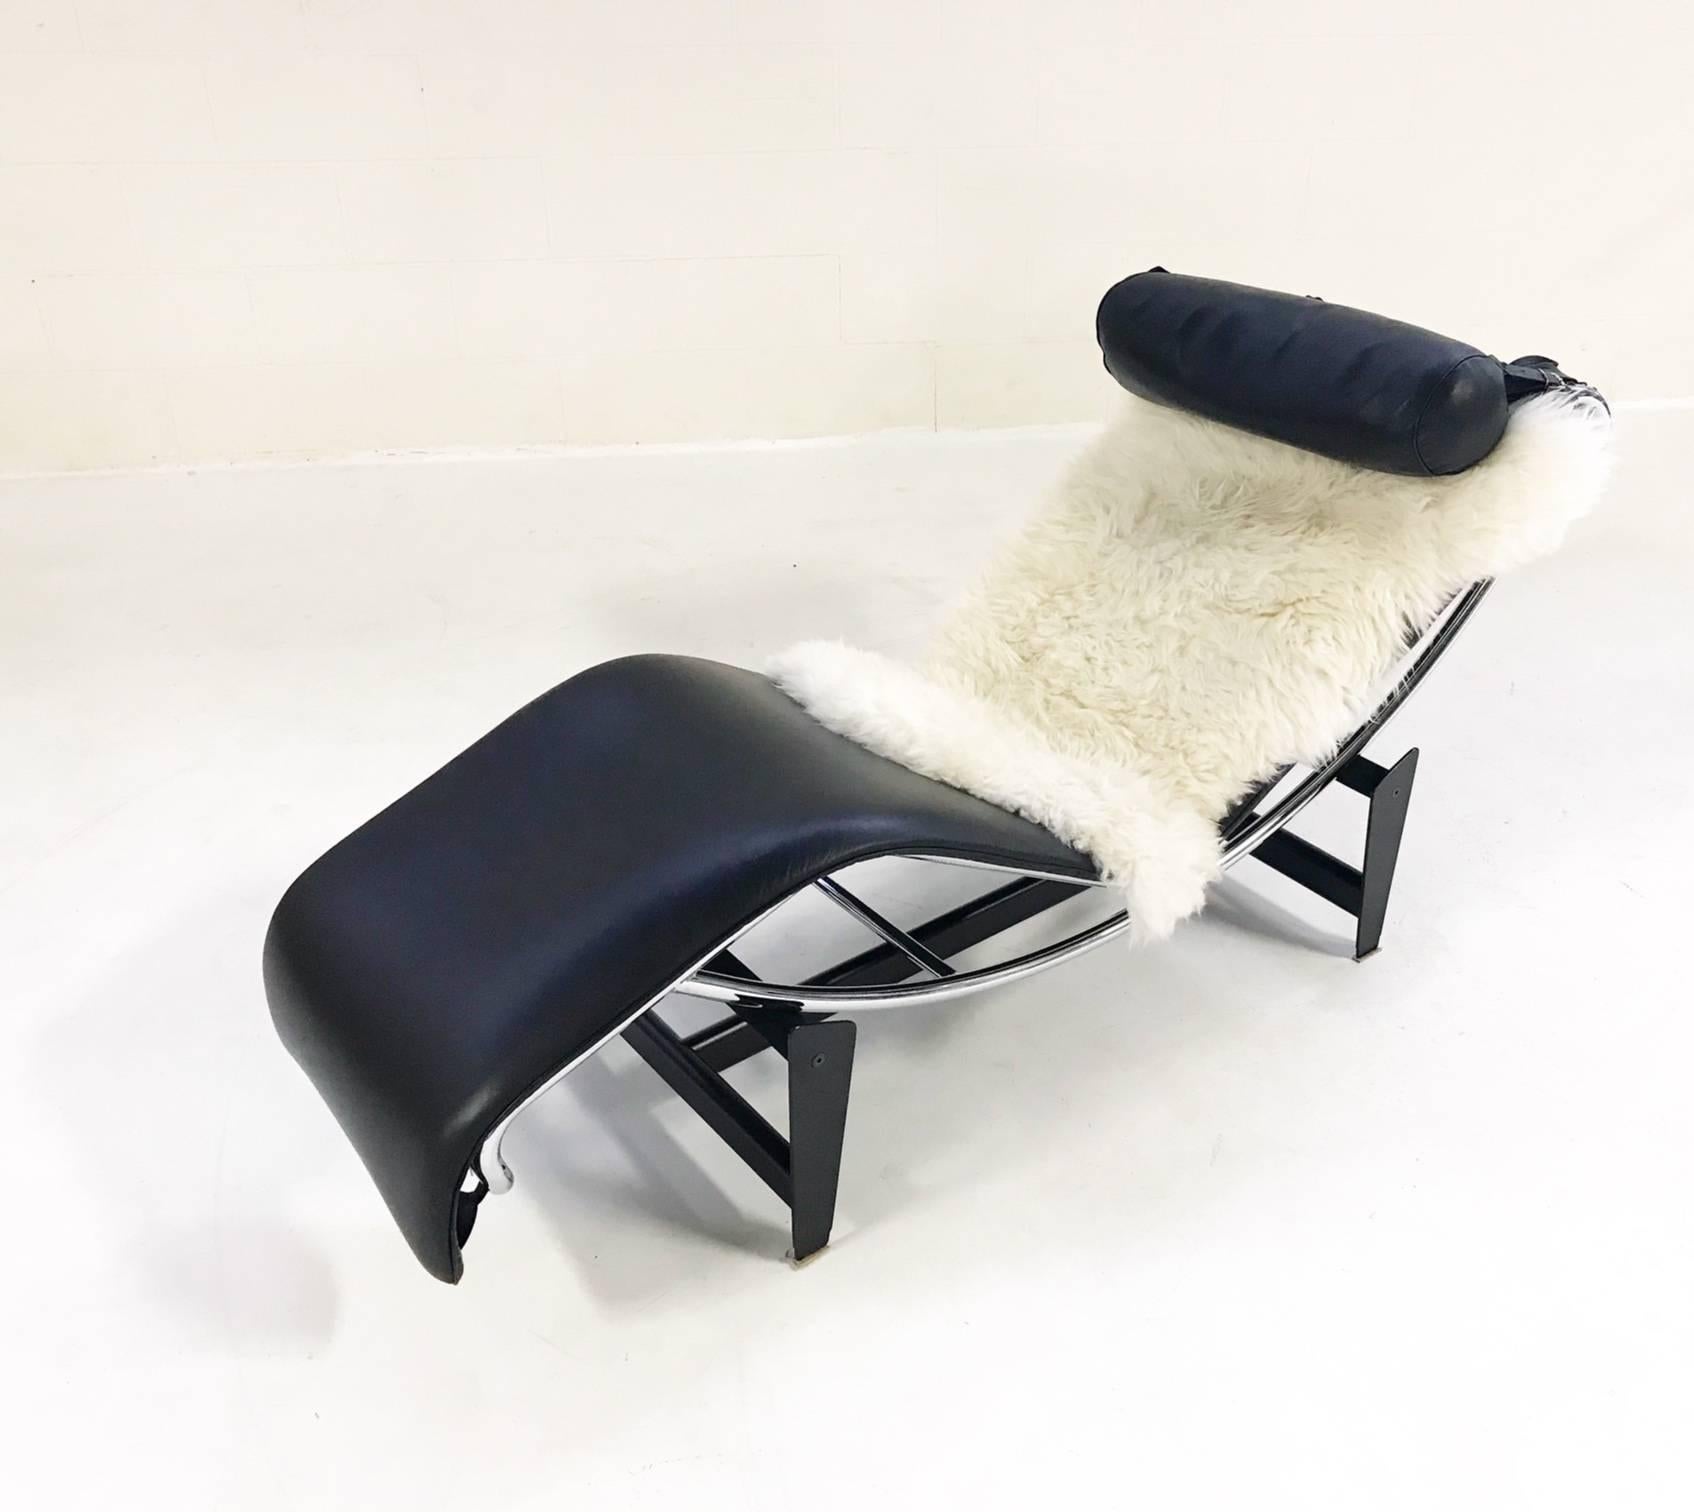 It's always on wishlists. The iconic LC4 chaise lounge. The leather and steel is in excellent condition. We added a Brazilian sheepskin for on trend coziness and a bit of texture. This piece is so freaking cool.

